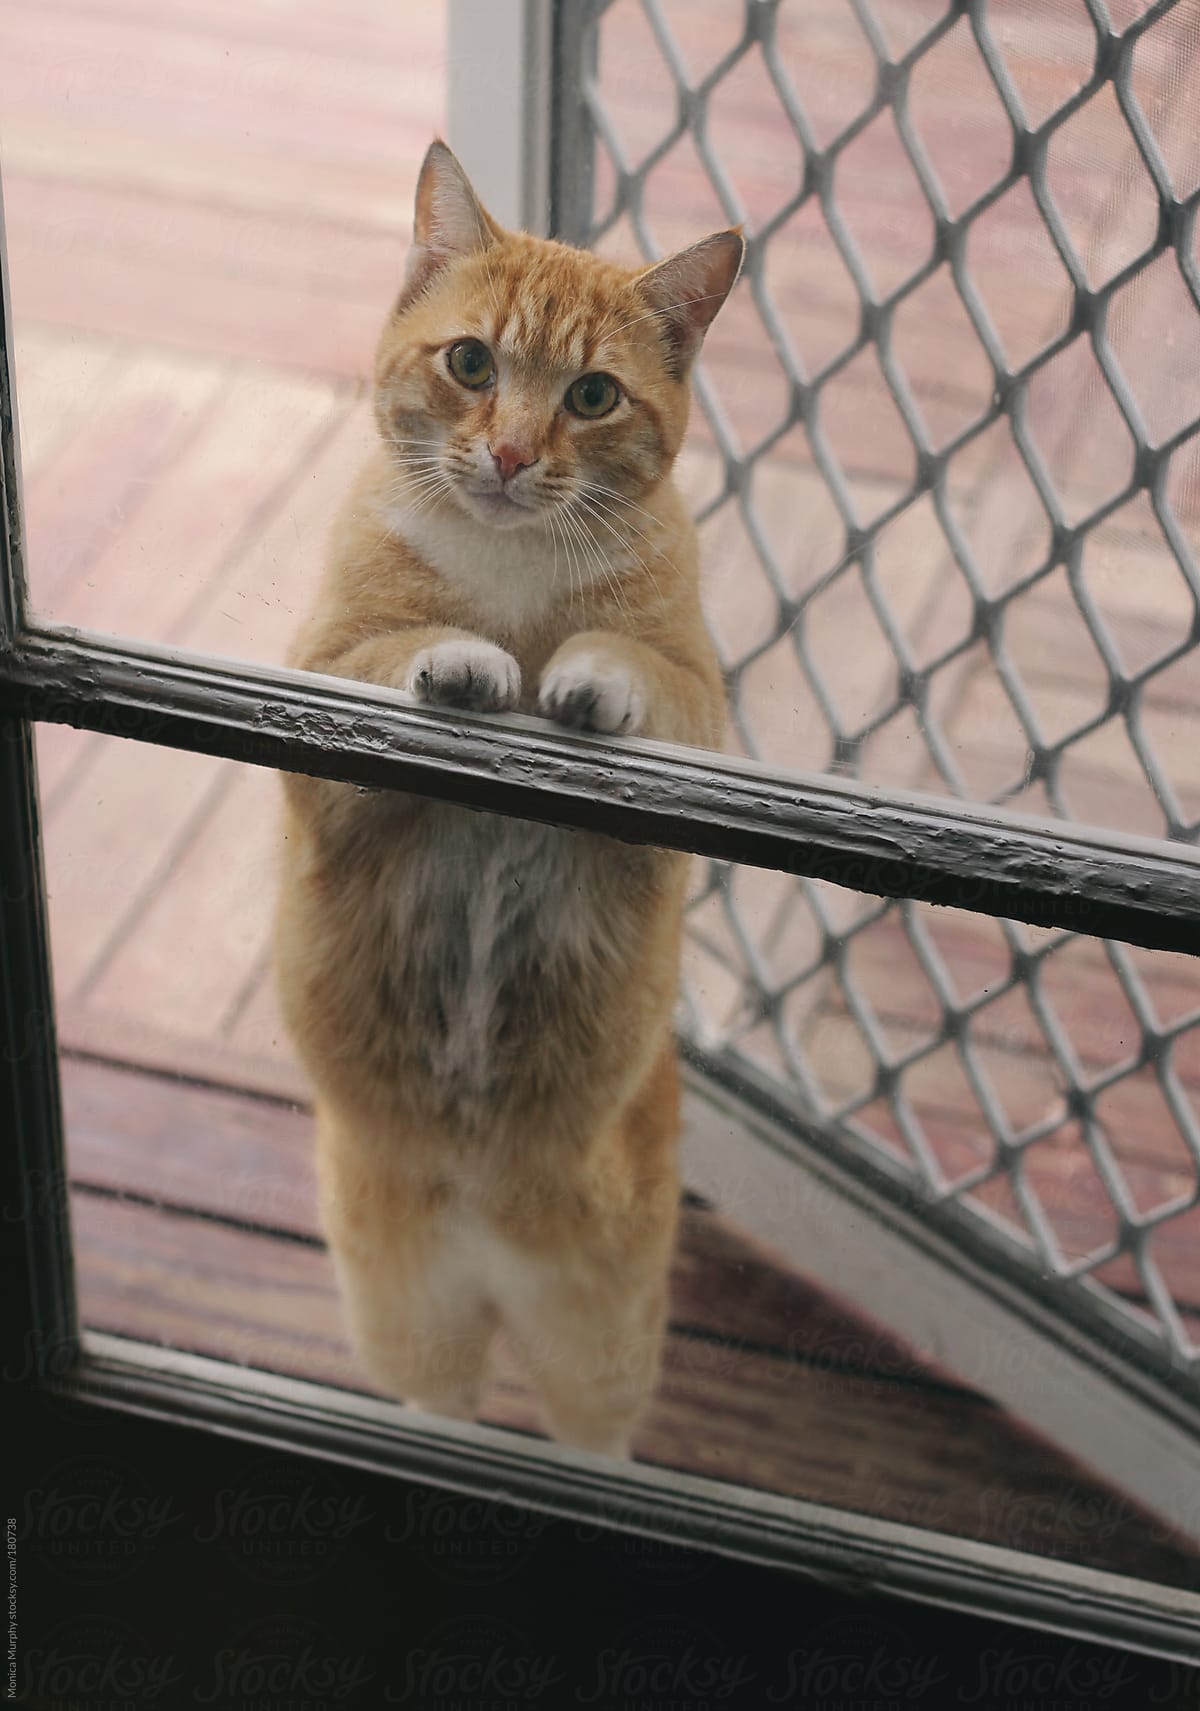 Cat looks into glass door, standing on hind legs, begging to be let in